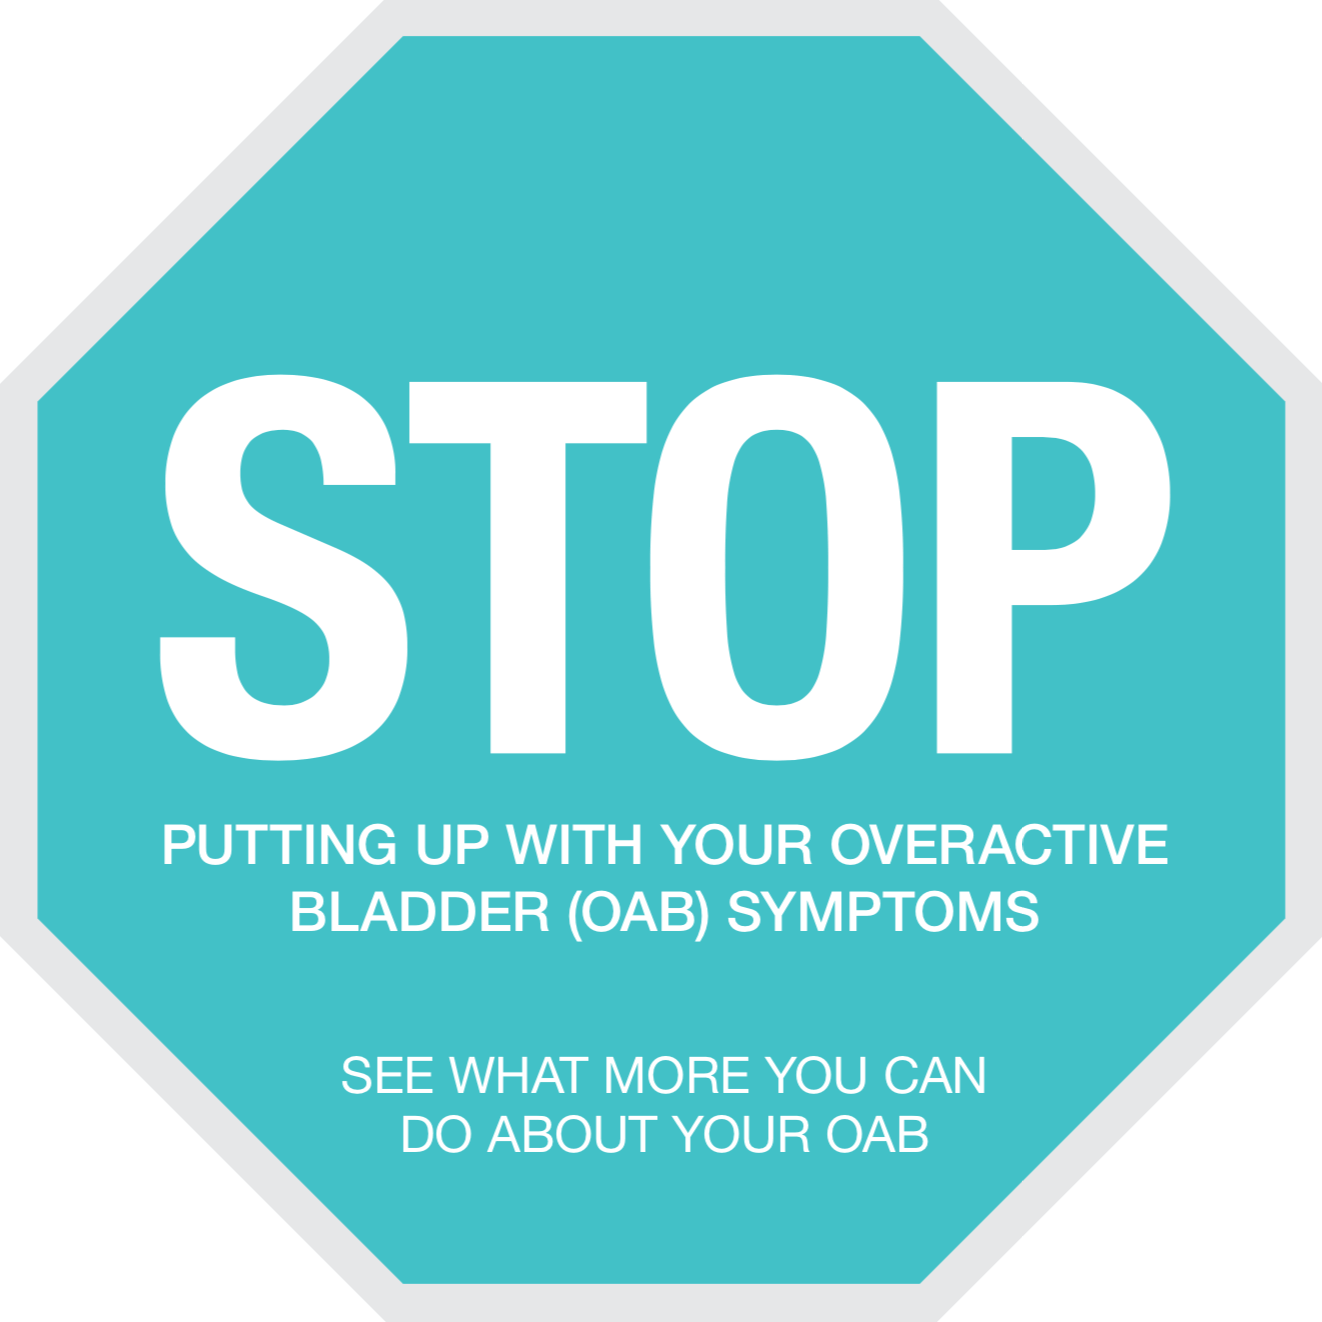 Stop Putting up With Your Overactive Bladder Symptoms Brochure